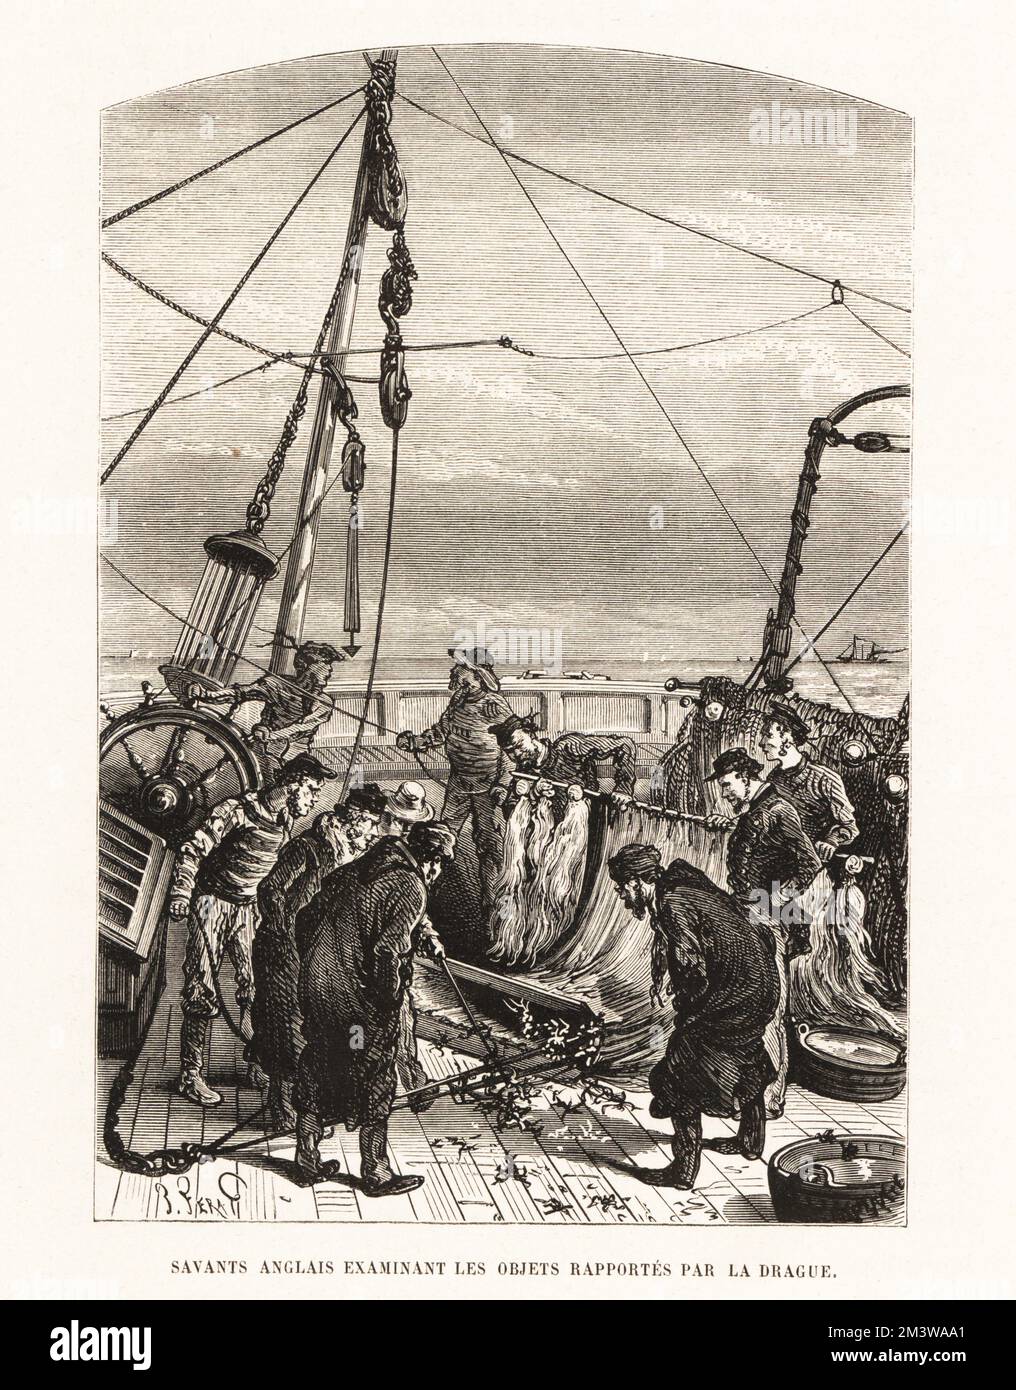 English sailors examining objects dredged from the sea. Fishermen checking their catch. Savants anglais examinant les objets rapporte par la drague. Woodcut by  Jules-Descartes Ferat from Alfred Fredol’s Le Monde de la Mer, the World of the Sea, edited by Olivier Fredol, Librairie Hachette et. Cie., Paris, 1881. Alfred Fredol was the pseudonym of French zoologist and botanist Alfred Moquin-Tandon, 1804-1863. Stock Photo